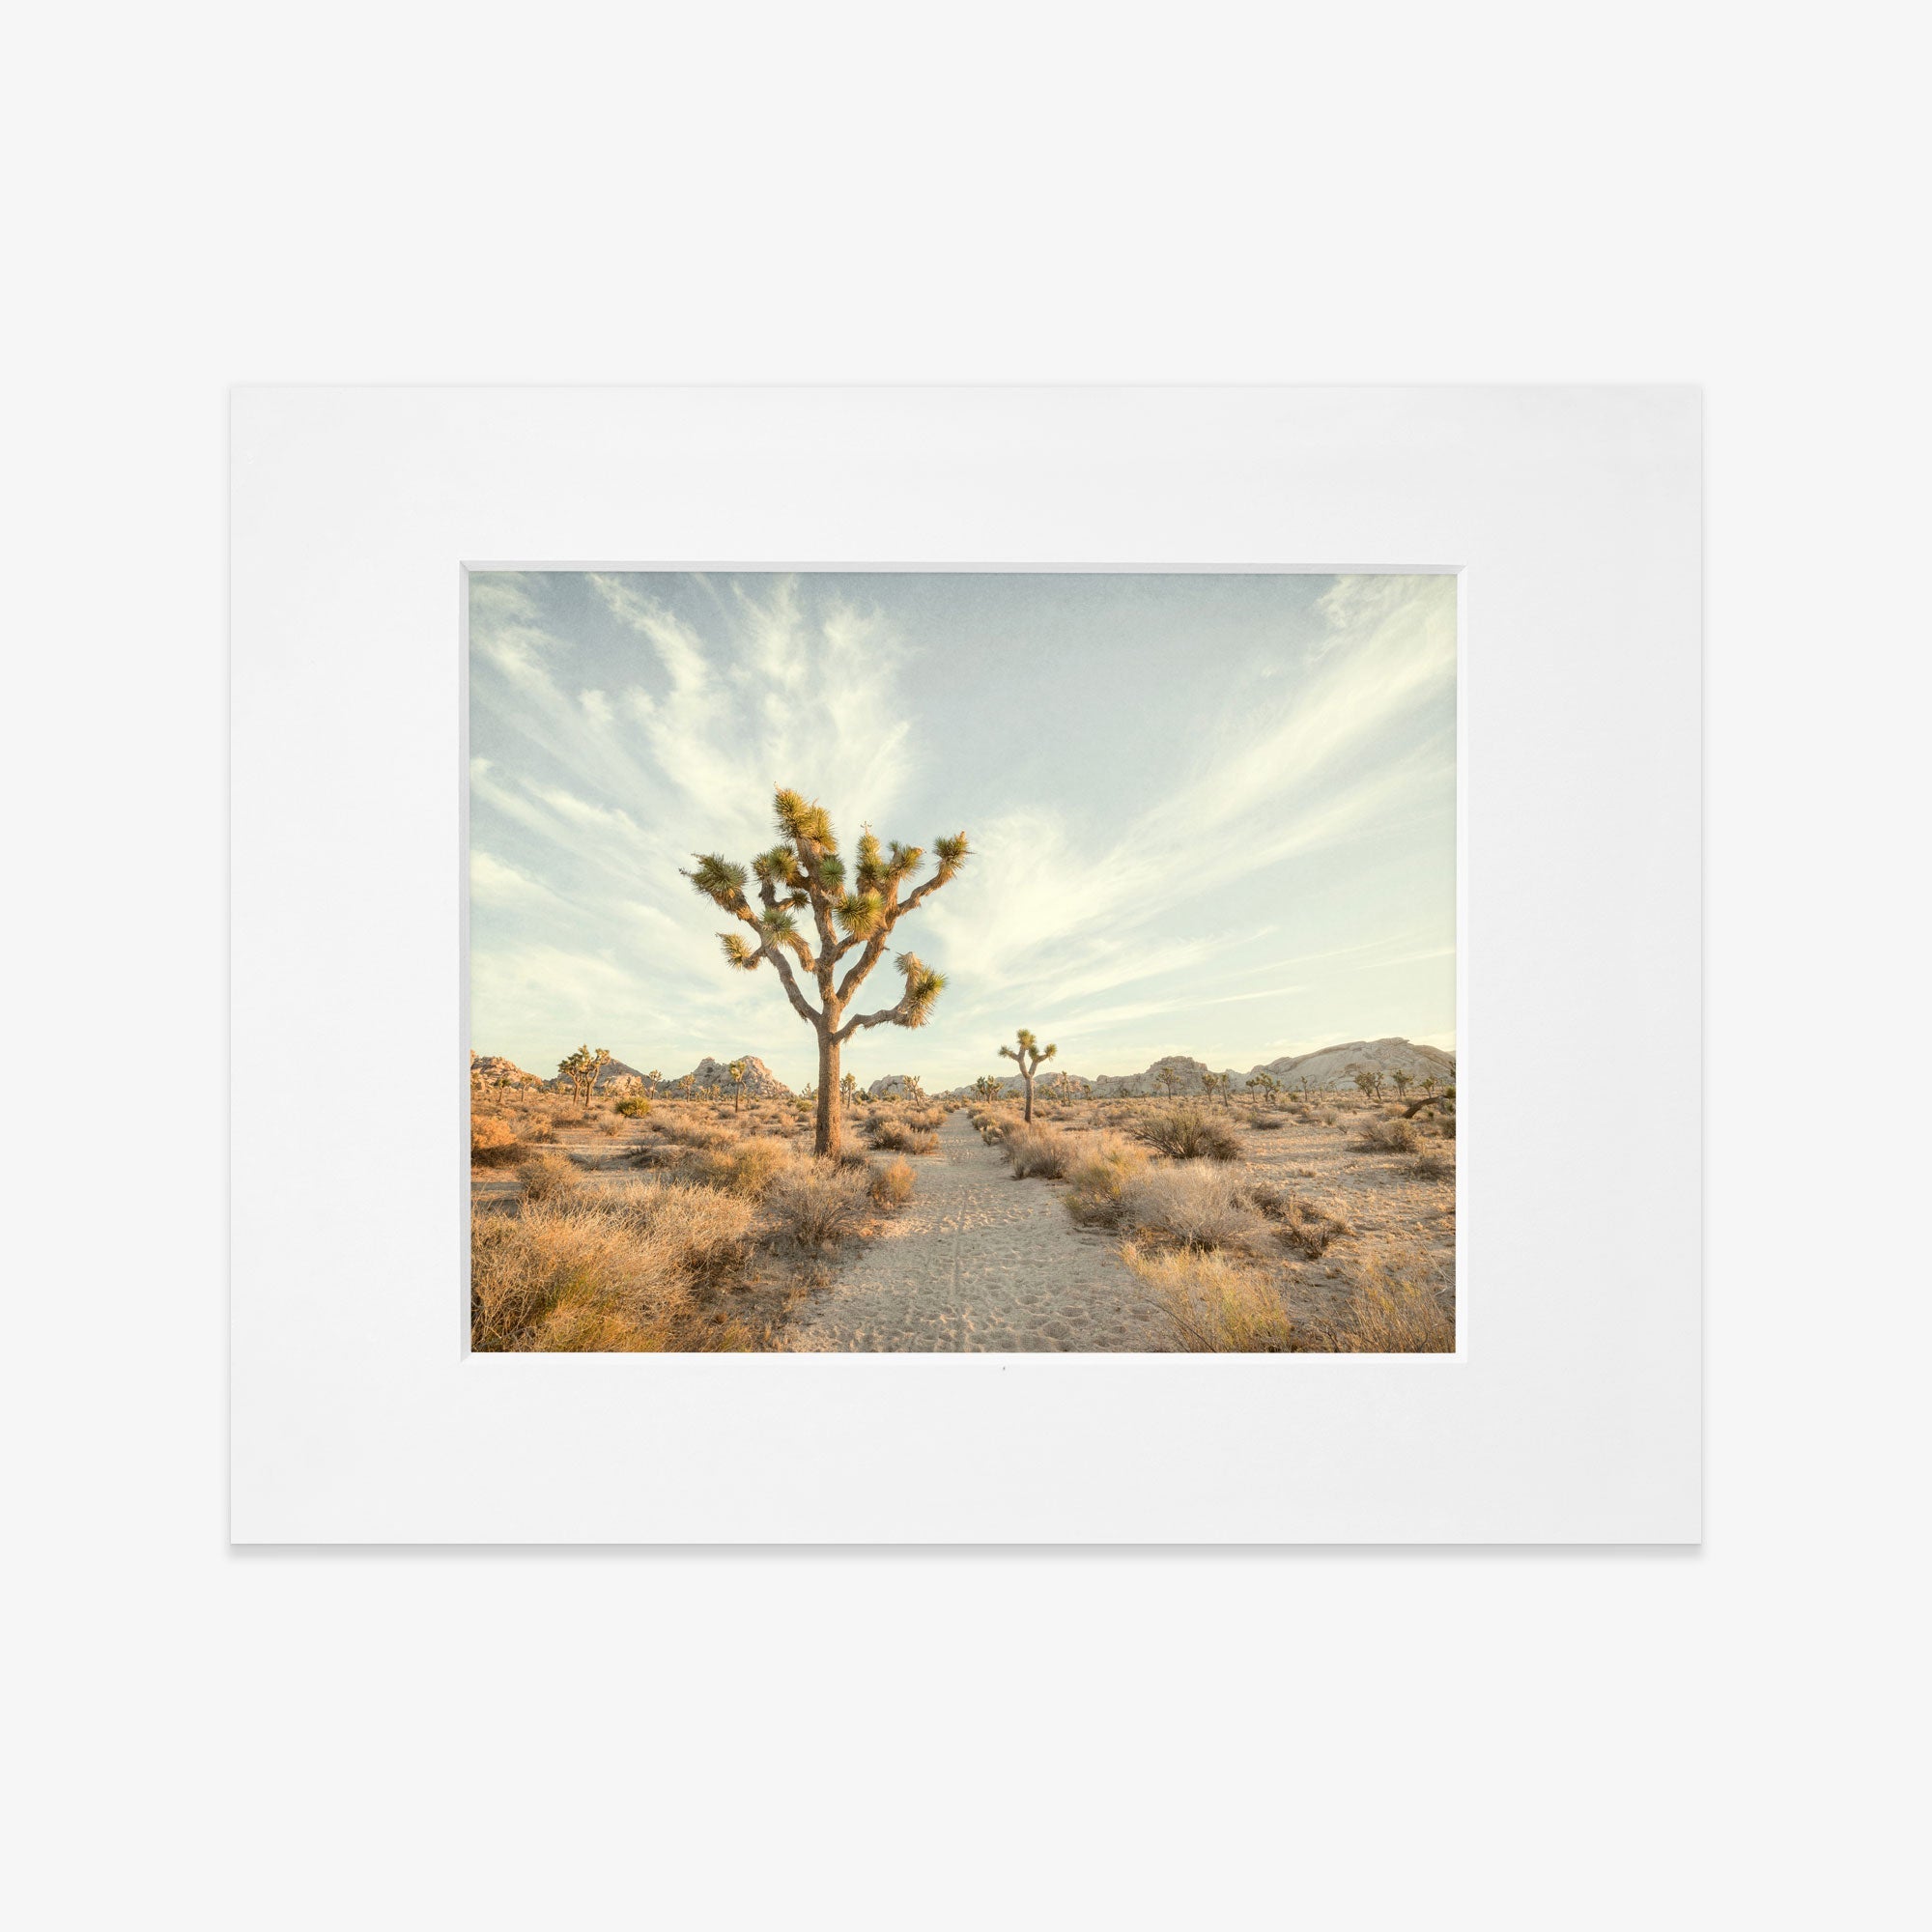 Framed photograph of a Palm Springs desert landscape featuring a prominent Joshua Tree Print, &#39;Path to Joshua&#39; in the center, surrounded by sparse desert scrub under a wide, cloudy sky. Soft warm tones dominate the image. (Brand Name: Offley Green)